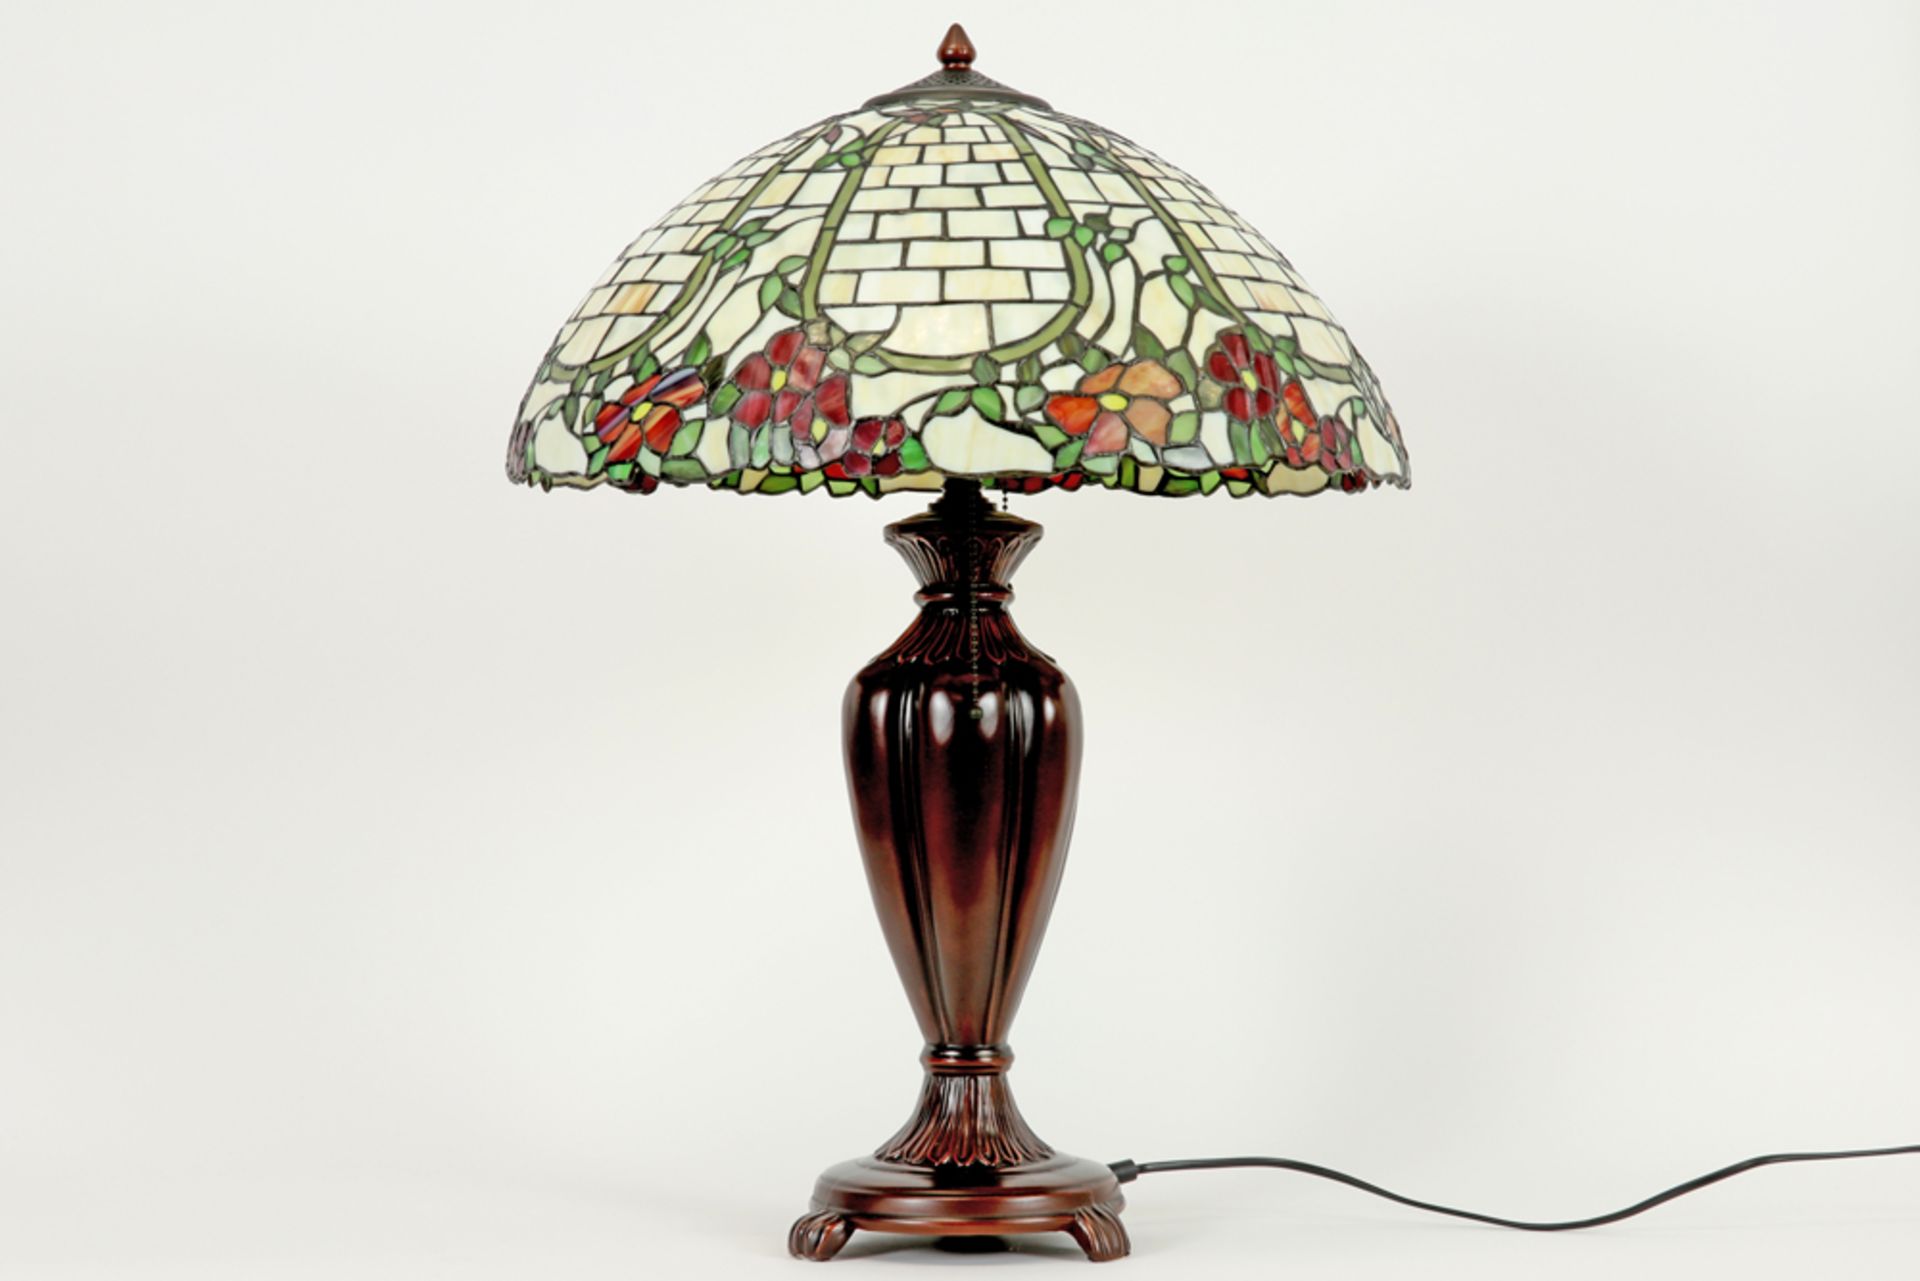 Tiffany style lamp with base in bronze and shade in glass-in-lead||Lamp in Tiffany-stijl met bronzen